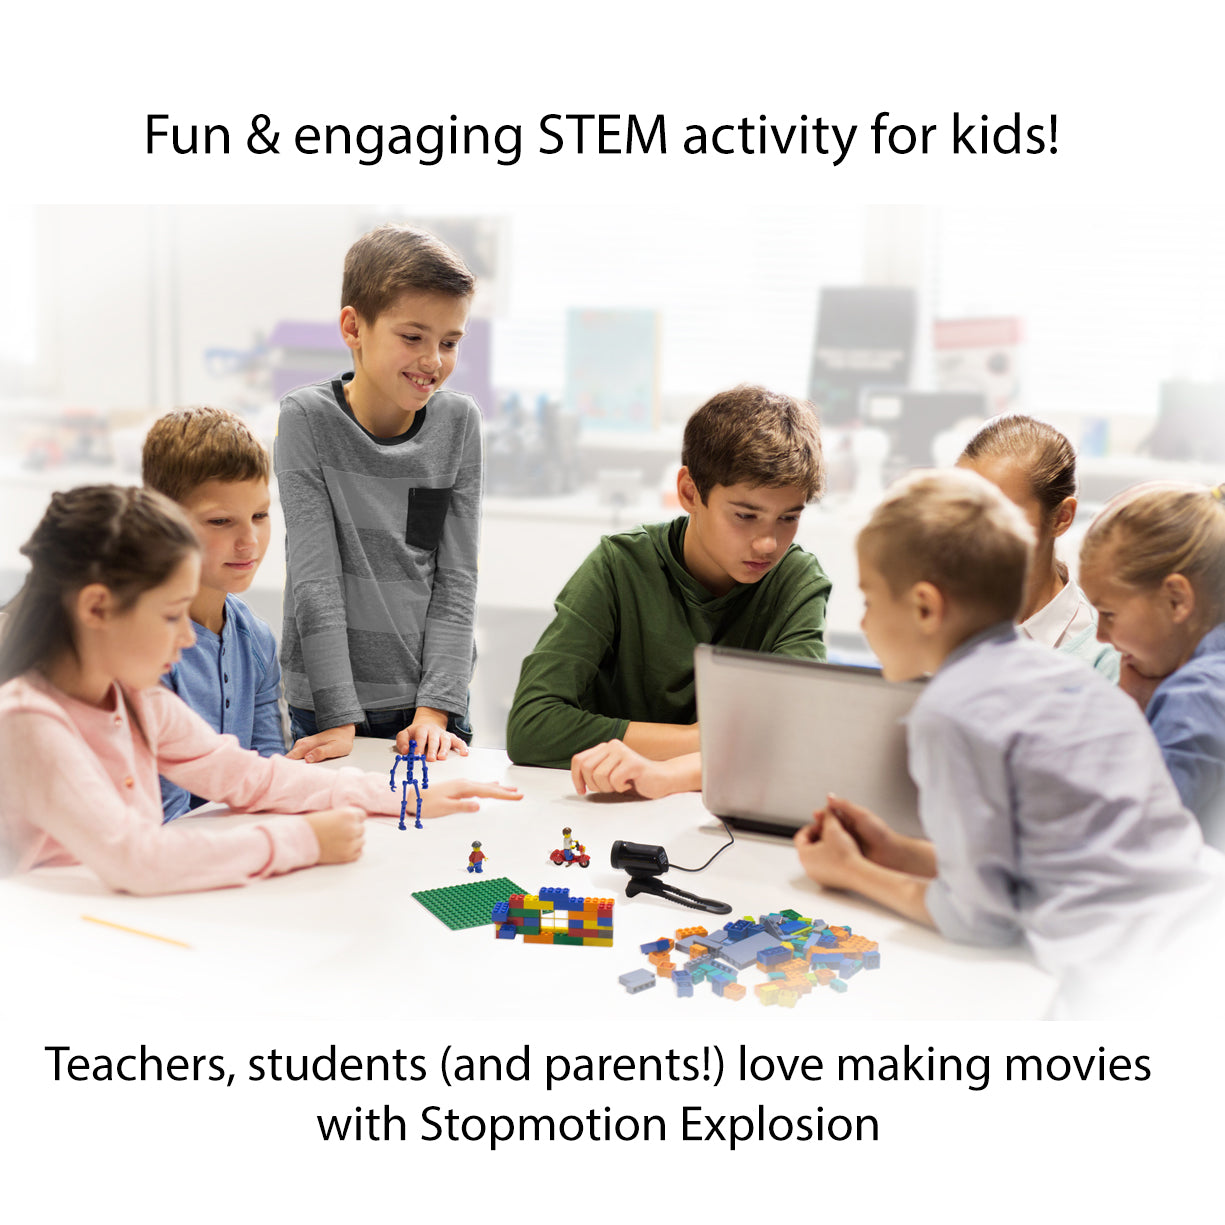 9 best stop motion animation kits for kids - Smart Toys